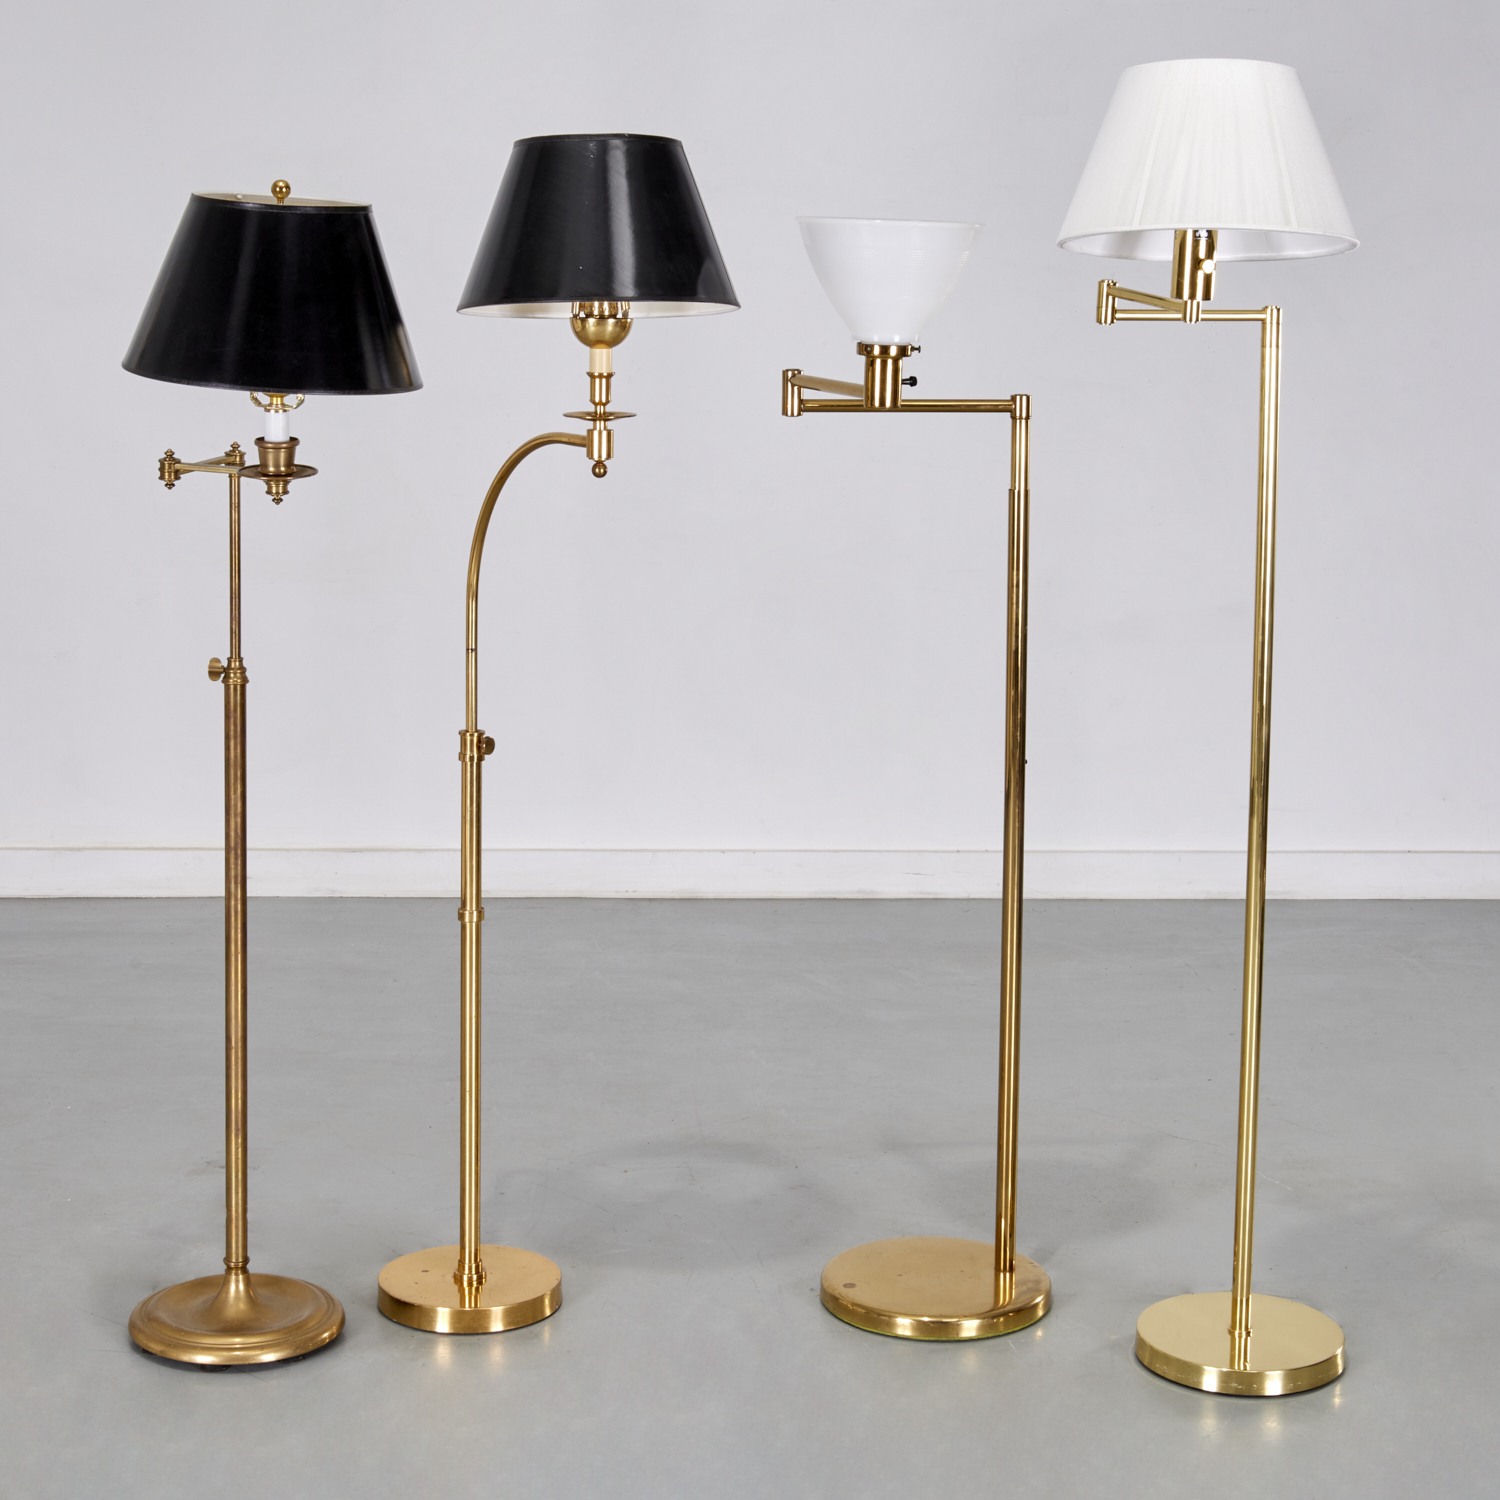  4 ARTICULATED BRASS FLOOR LAMPS  3603eb